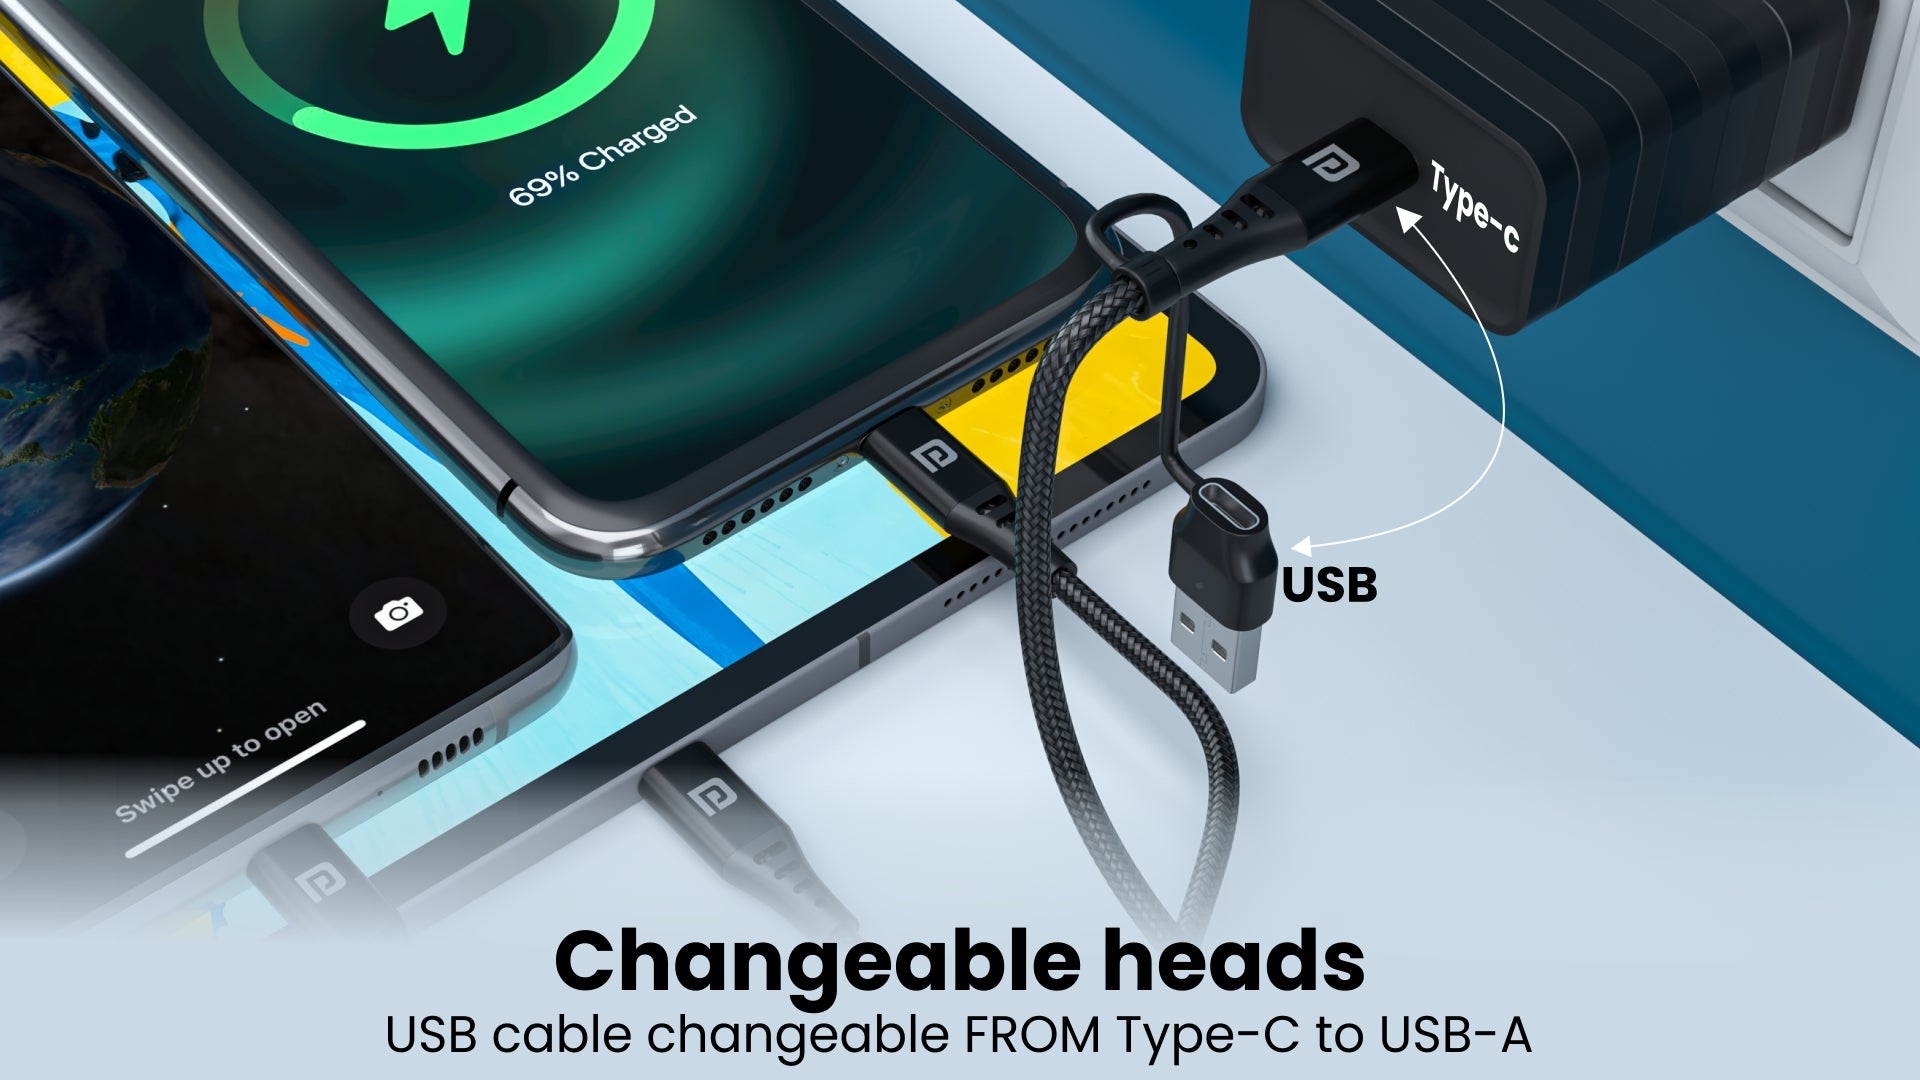 PUSB cable changeable FROM Type-C to USB-A